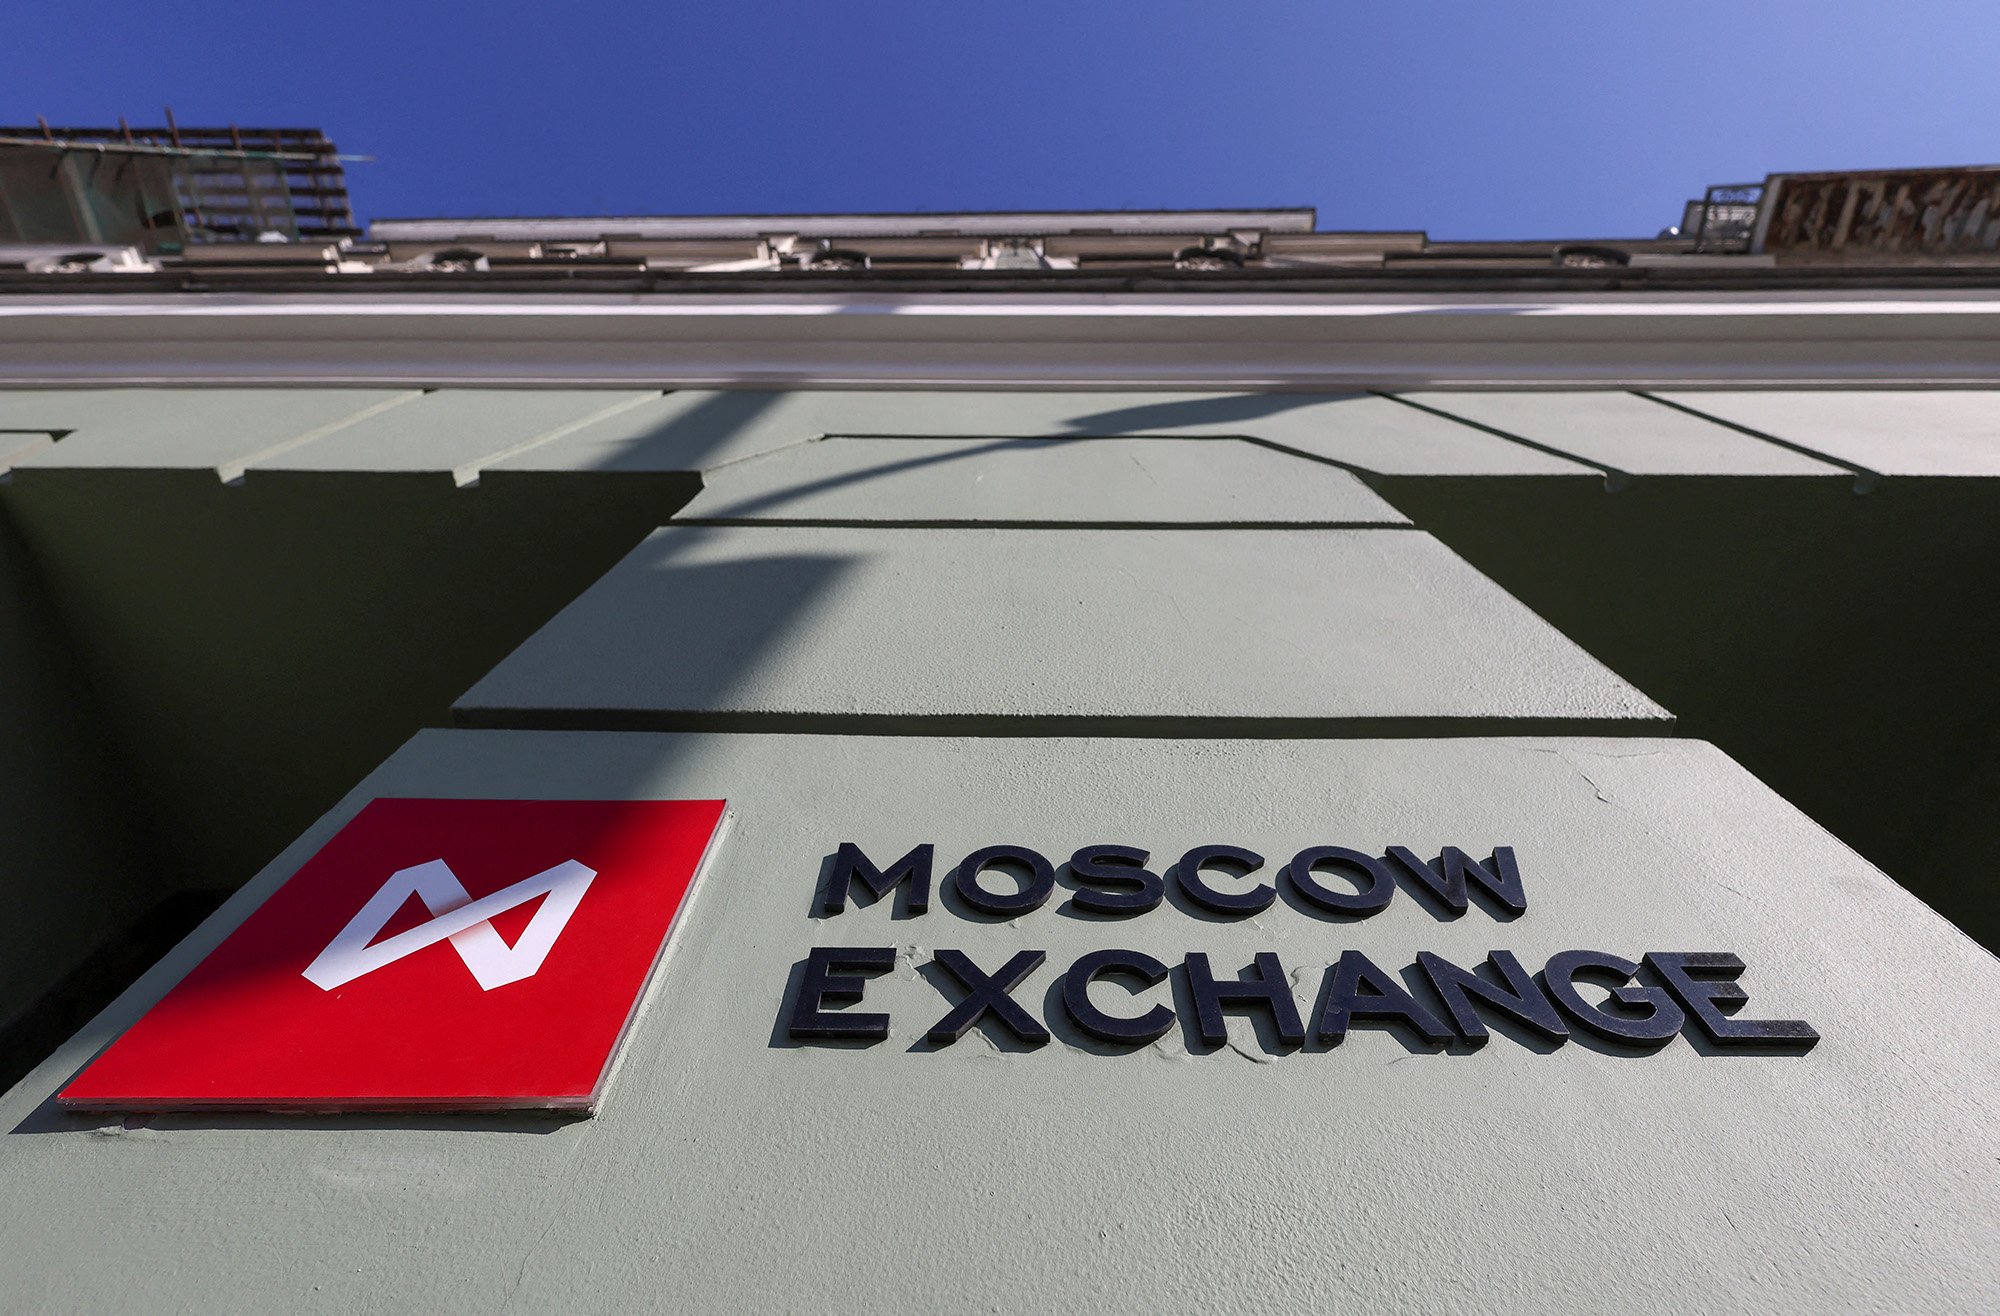 The office of the Moscow Exchange in the city of Moscow, Russia, on March 24.